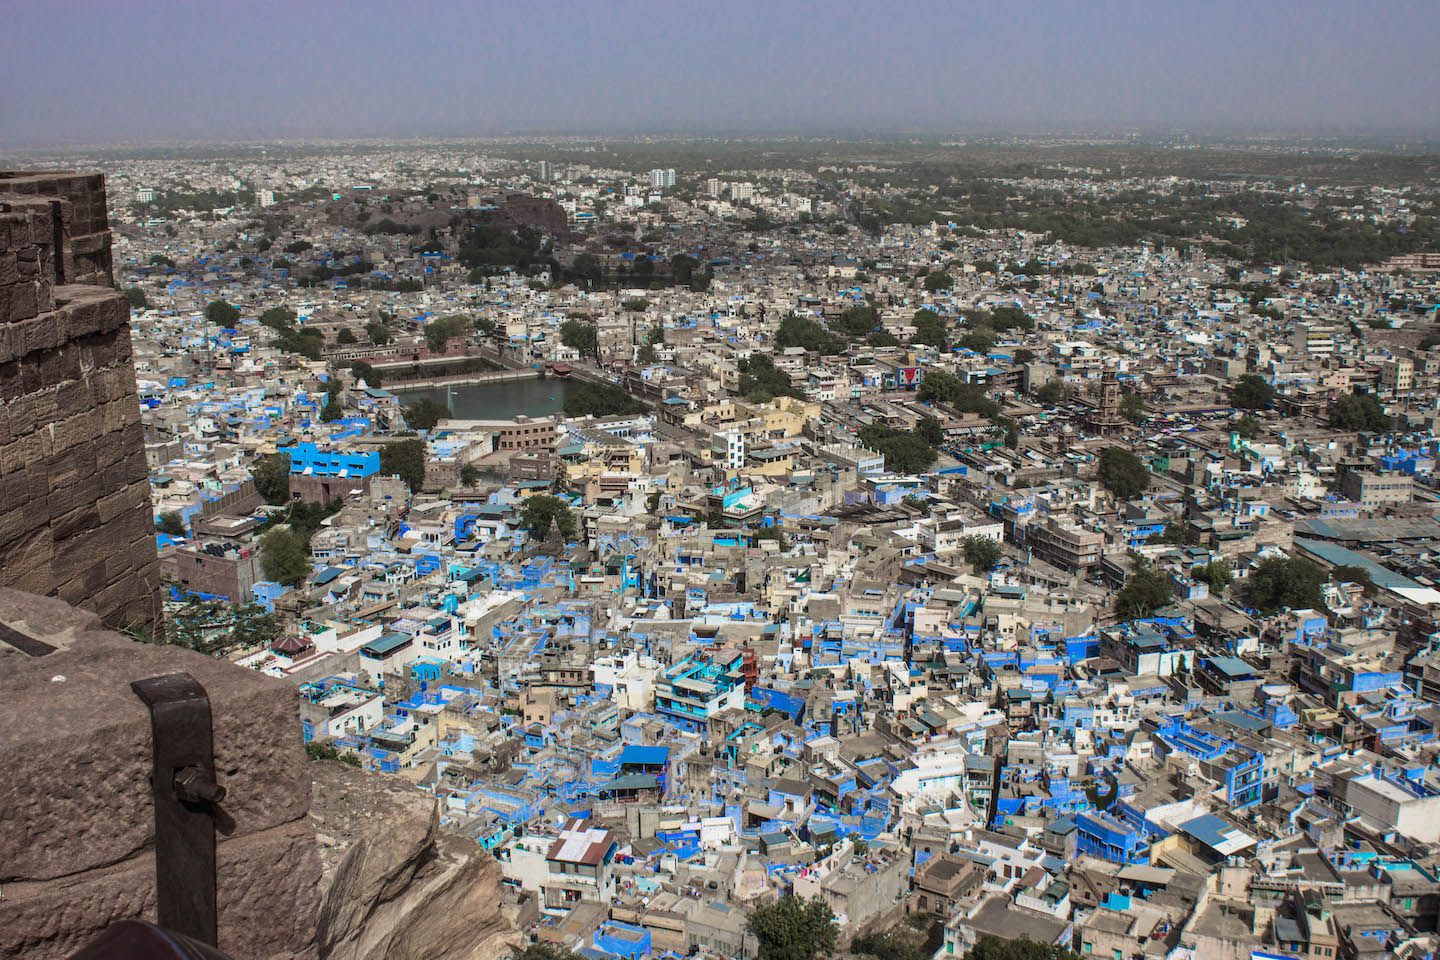 View of the "blue city" of Jodhpur, India